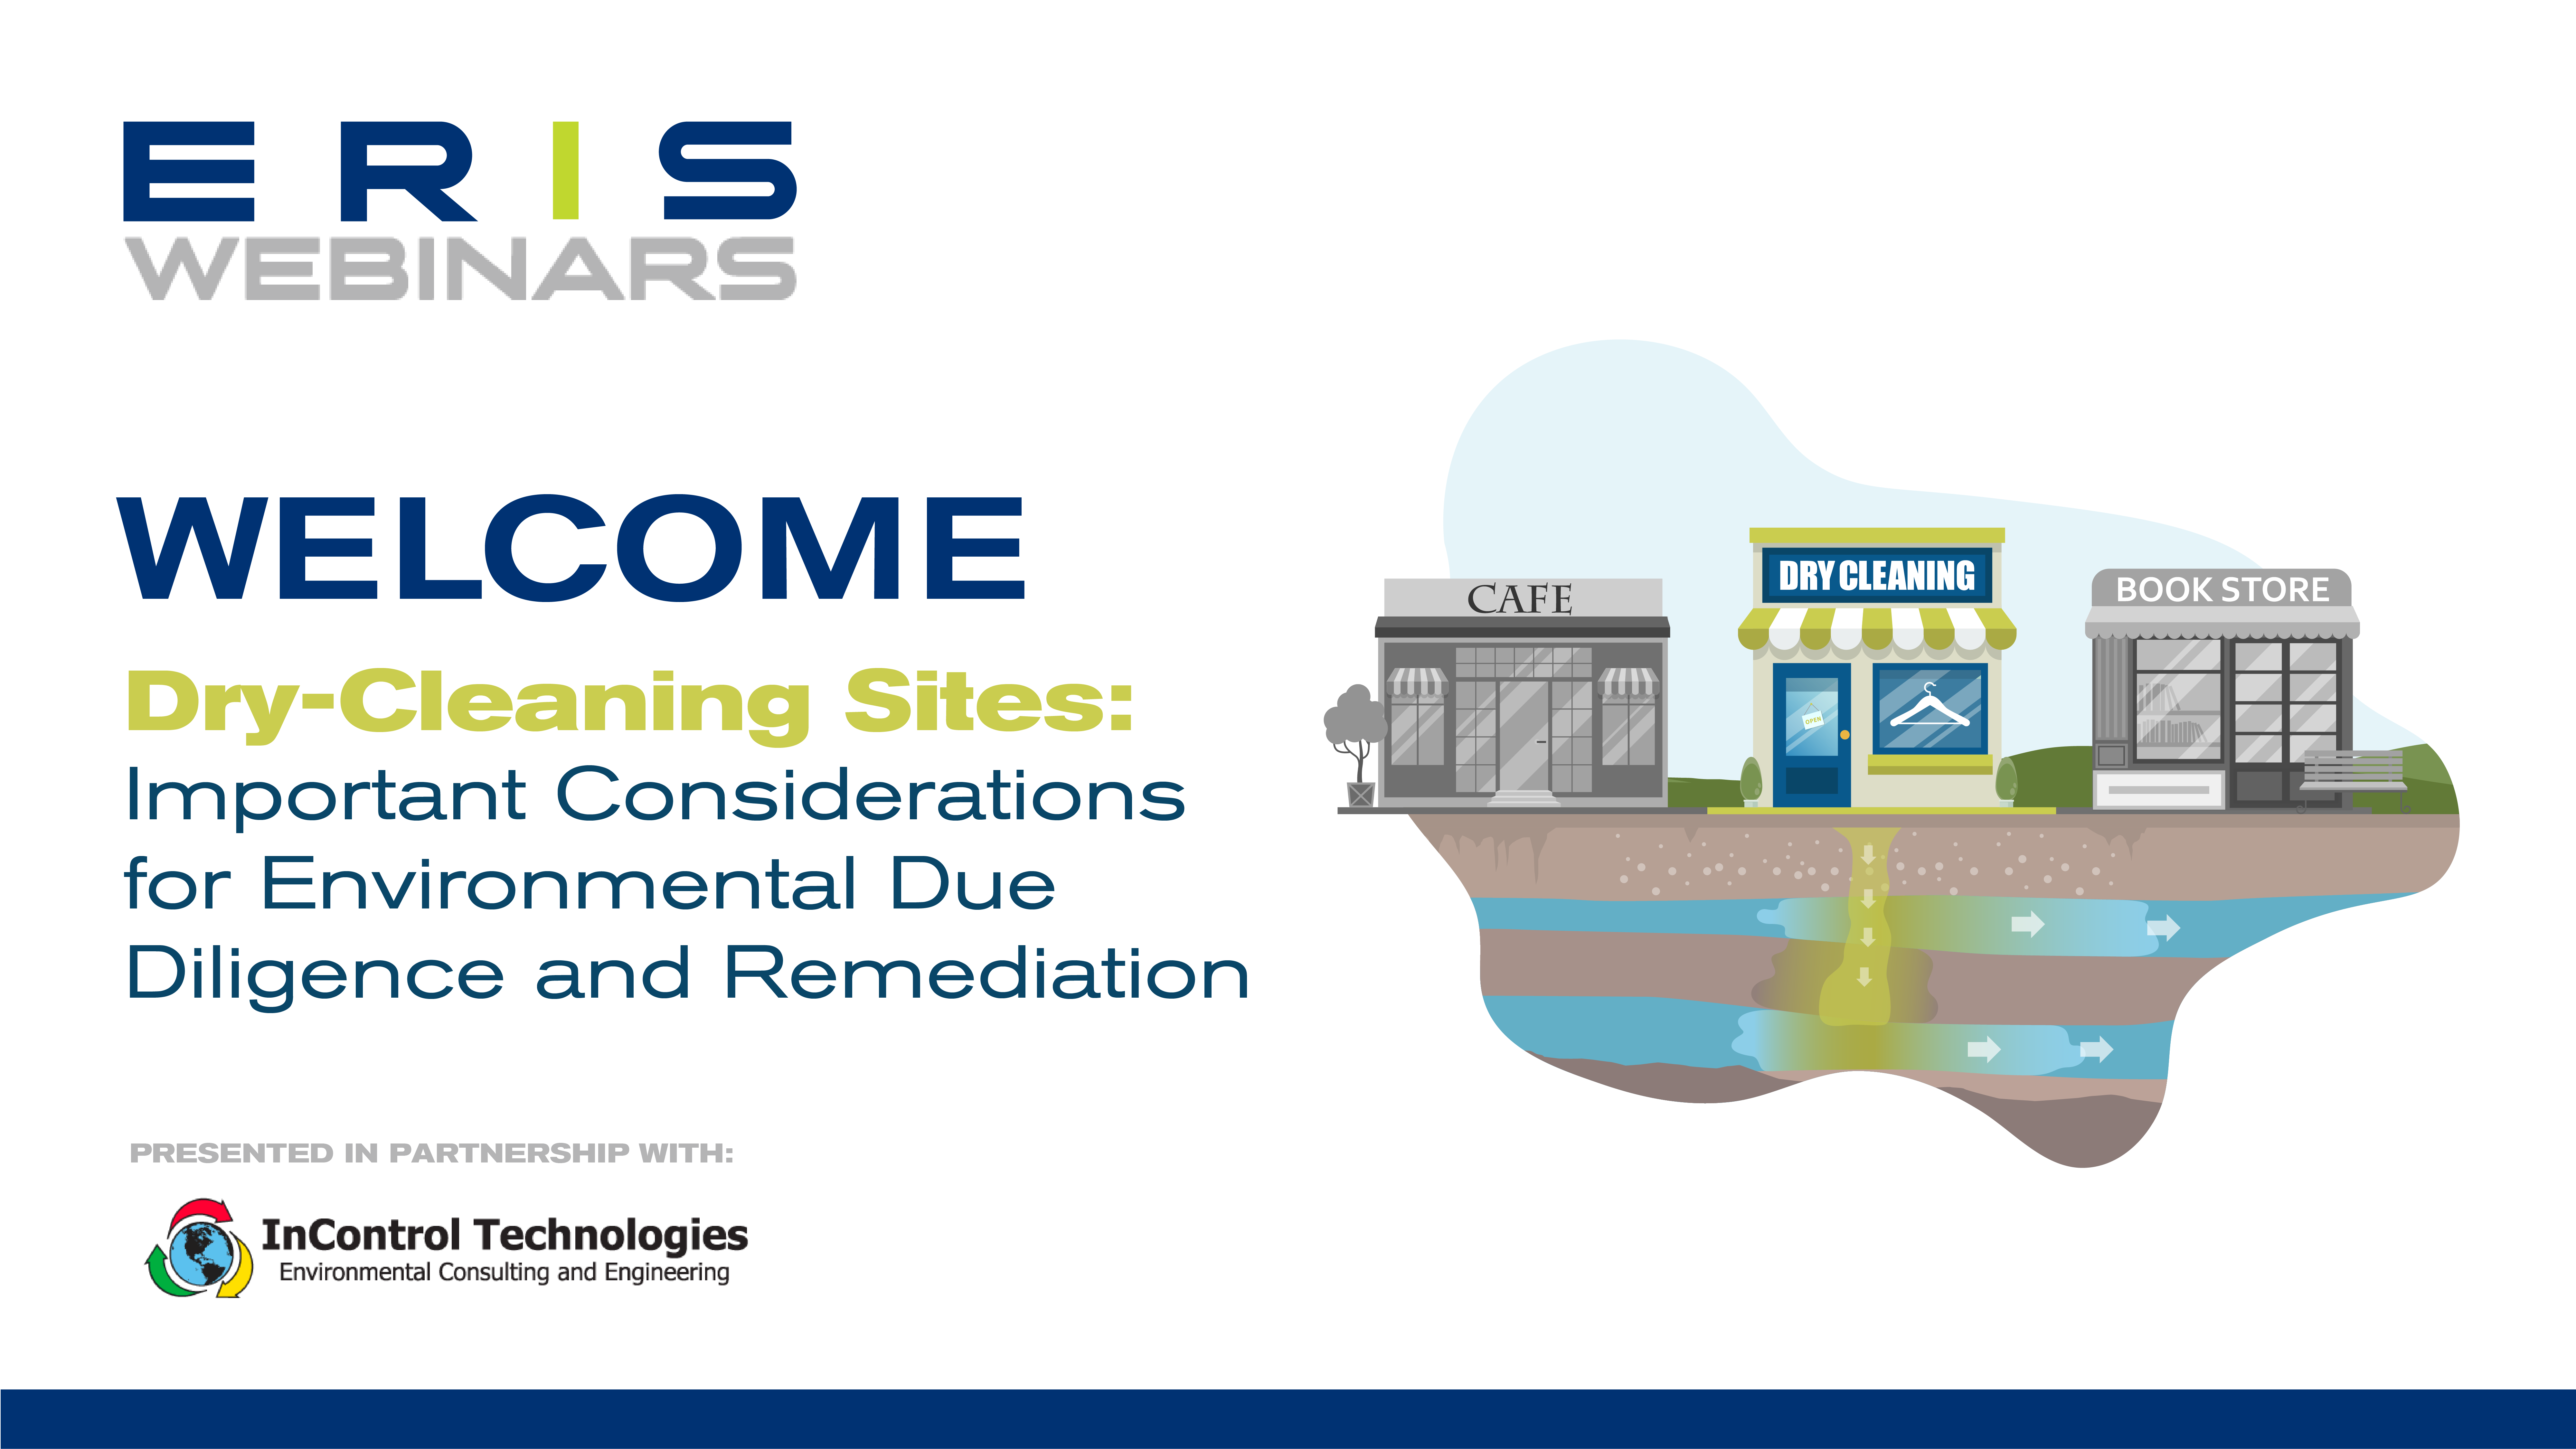 Webinar – Dry-Cleaning Sites: Important Considerations for Environmental Due Diligence and Remediation